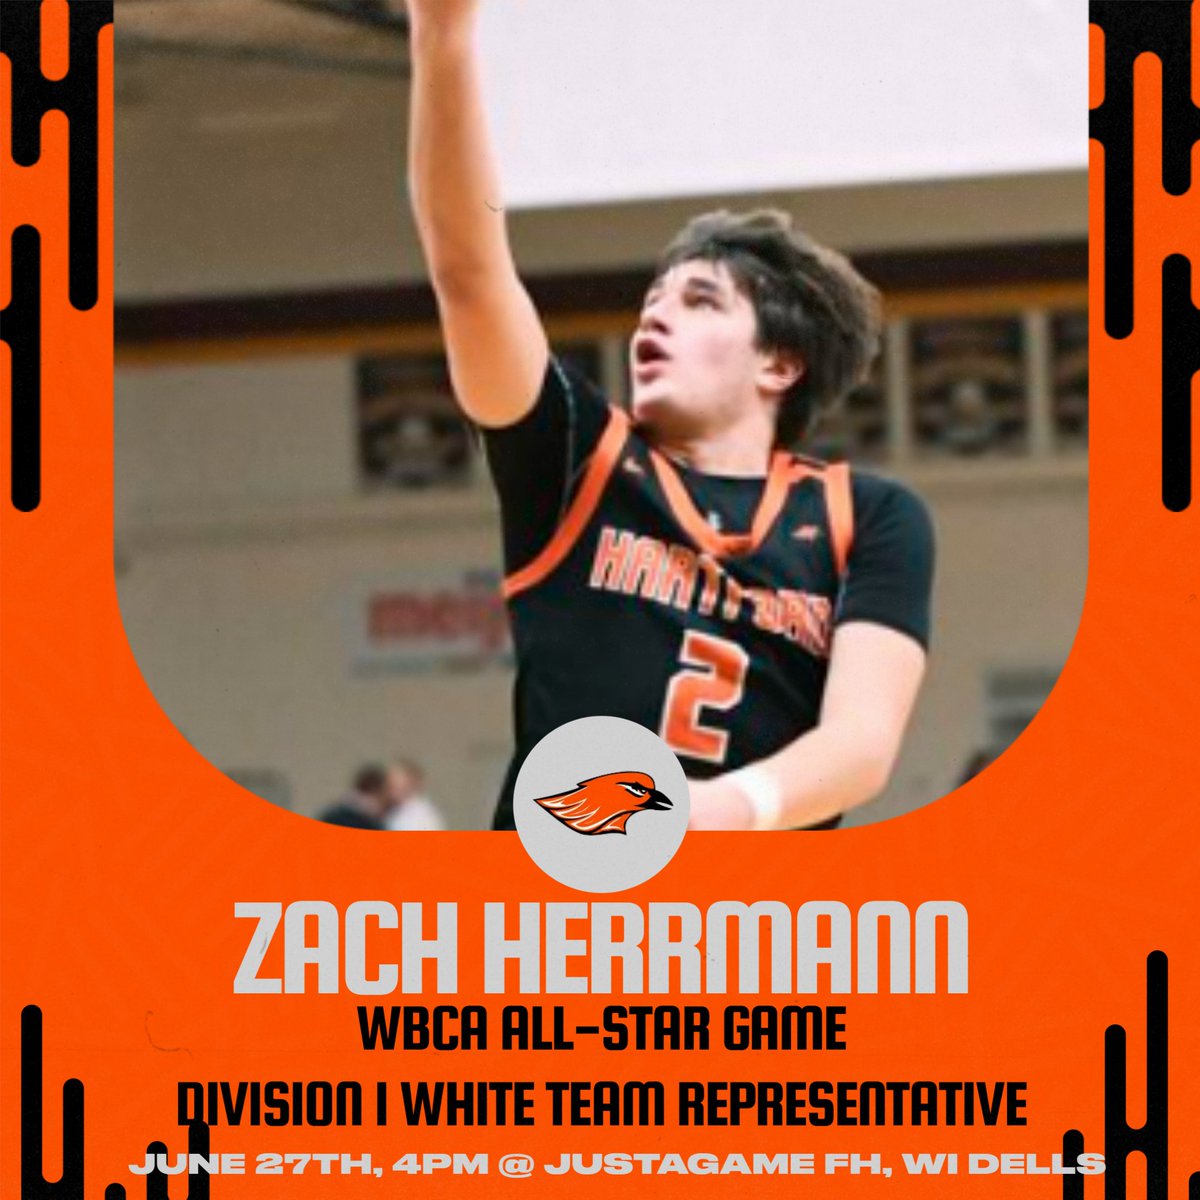 @ZachHerrmann_1 was selected to participate in the WBCA Division 1 All-Star game as a member of the White Team on June 27th at @JustAgame1, 4pm start! Well deserved! Please consider donating to a great cause! wisbca.org/allstar-game/d…